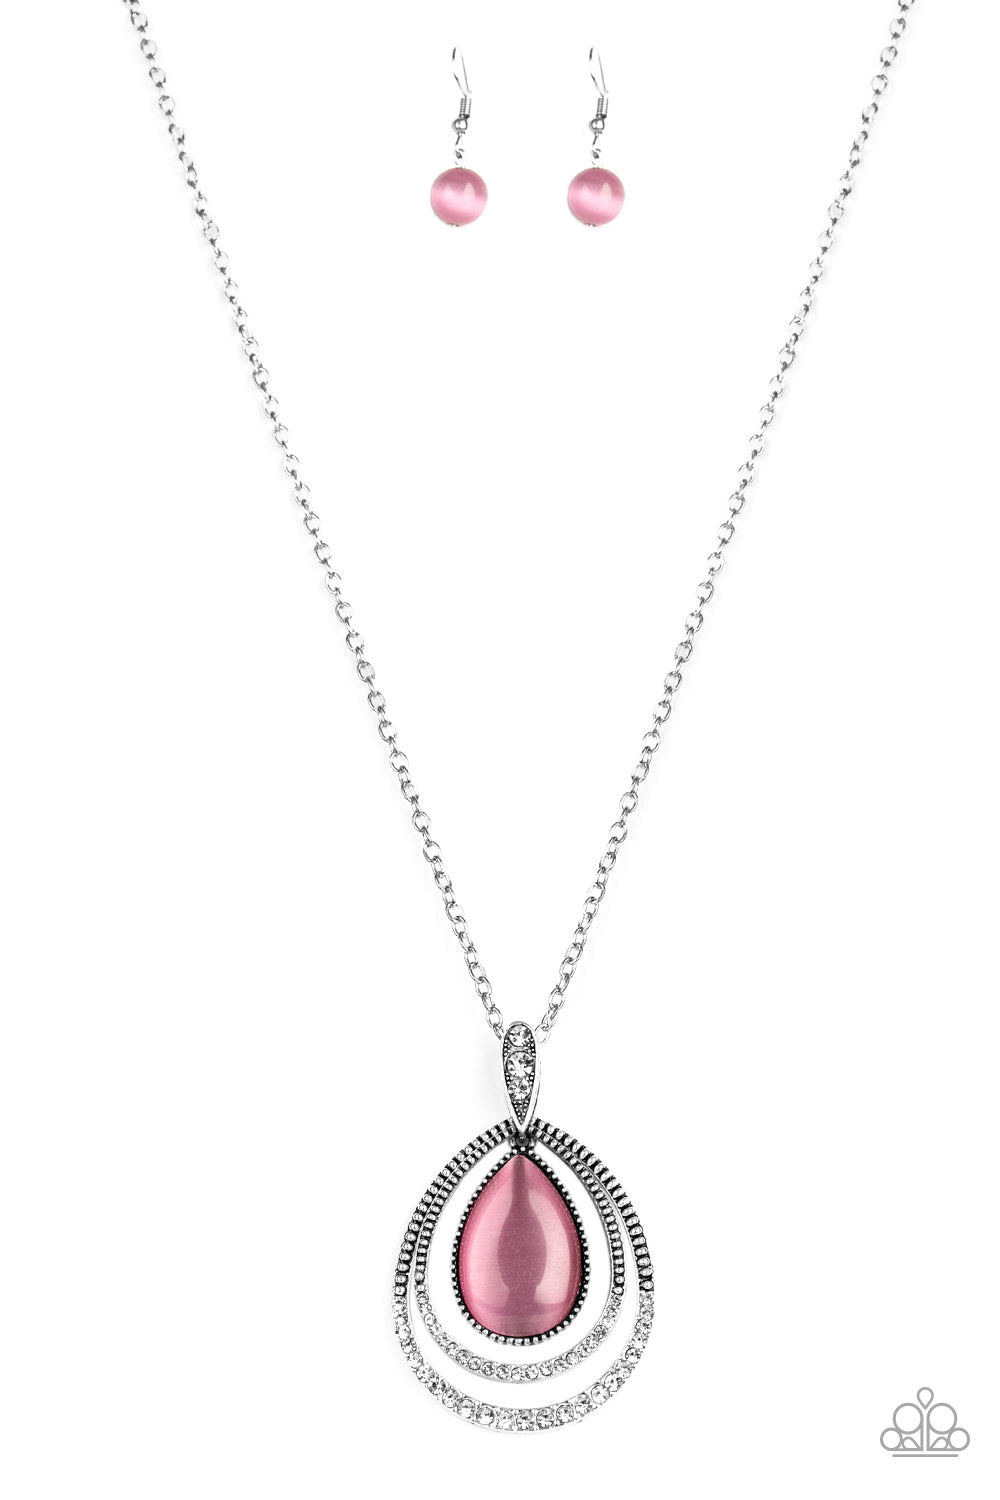 GLOW AND TELL - PINK TEARDROP MOONSTONE NECKLACE